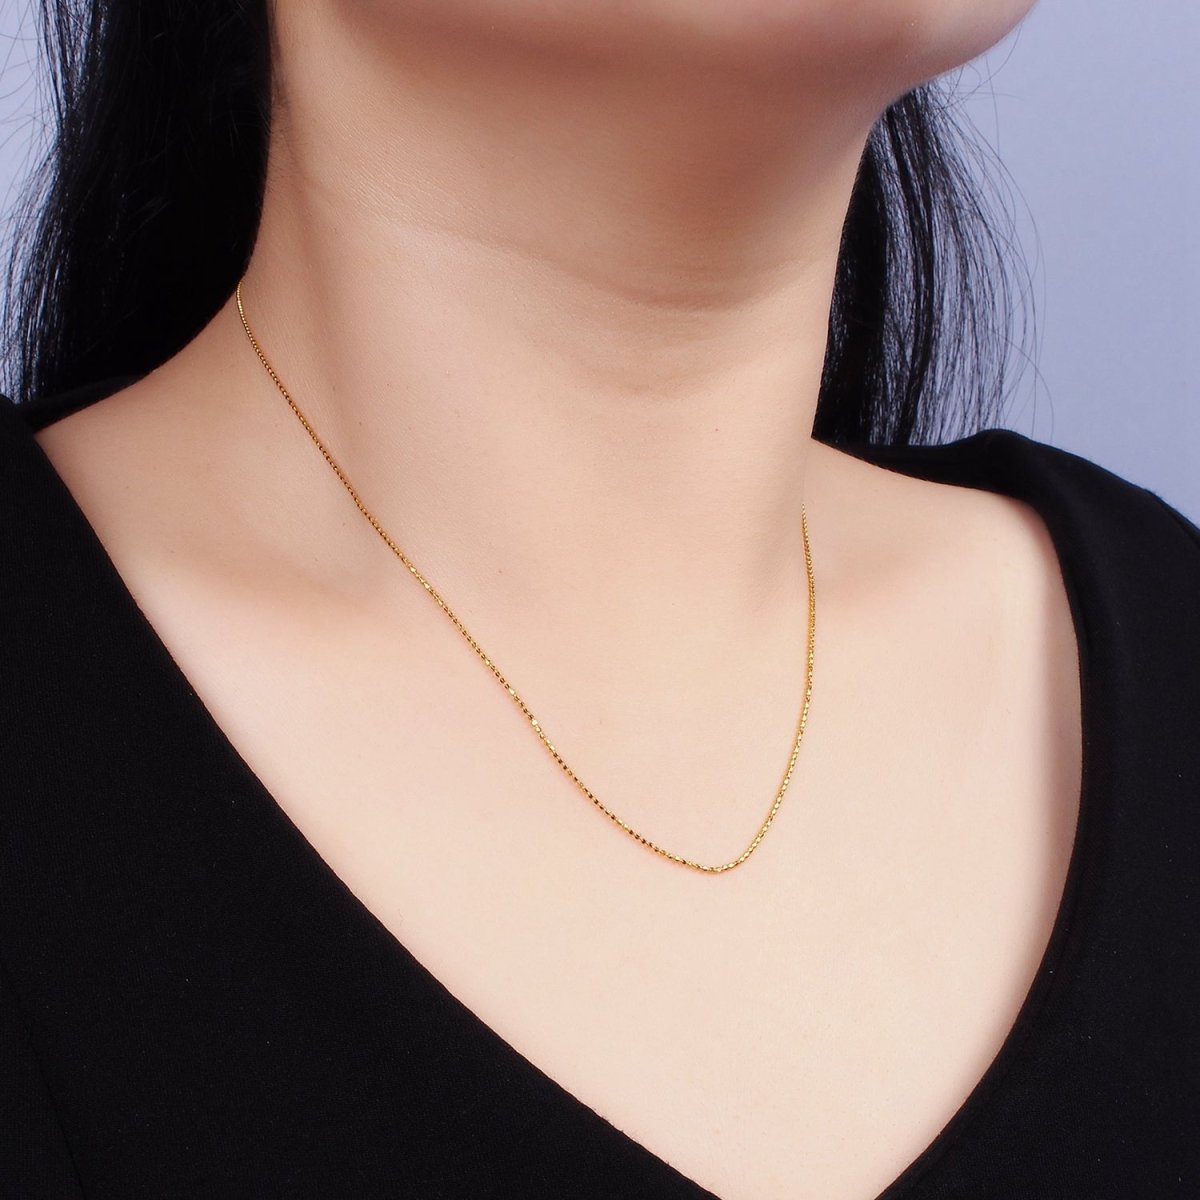 16K Gold Vermeil S925 Sterling Silver 0.9mm Dainty Bead 15.5 Inch Chain Necklace | WA-1949 Clearance Pricing - DLUXCA